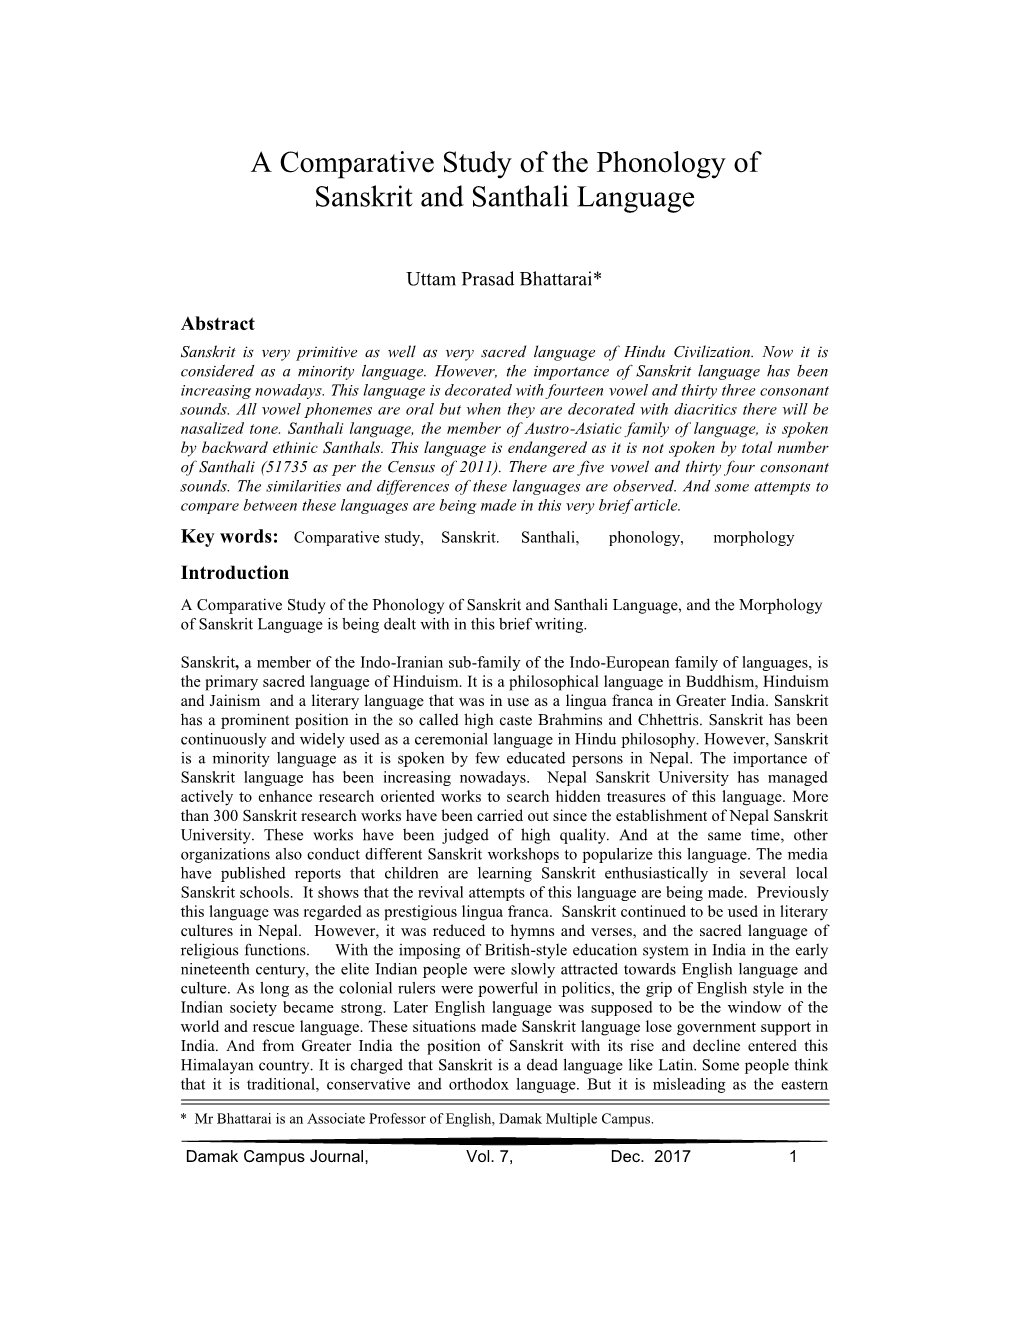 A Comparative Study of the Phonology of Sanskrit and Santhali Language